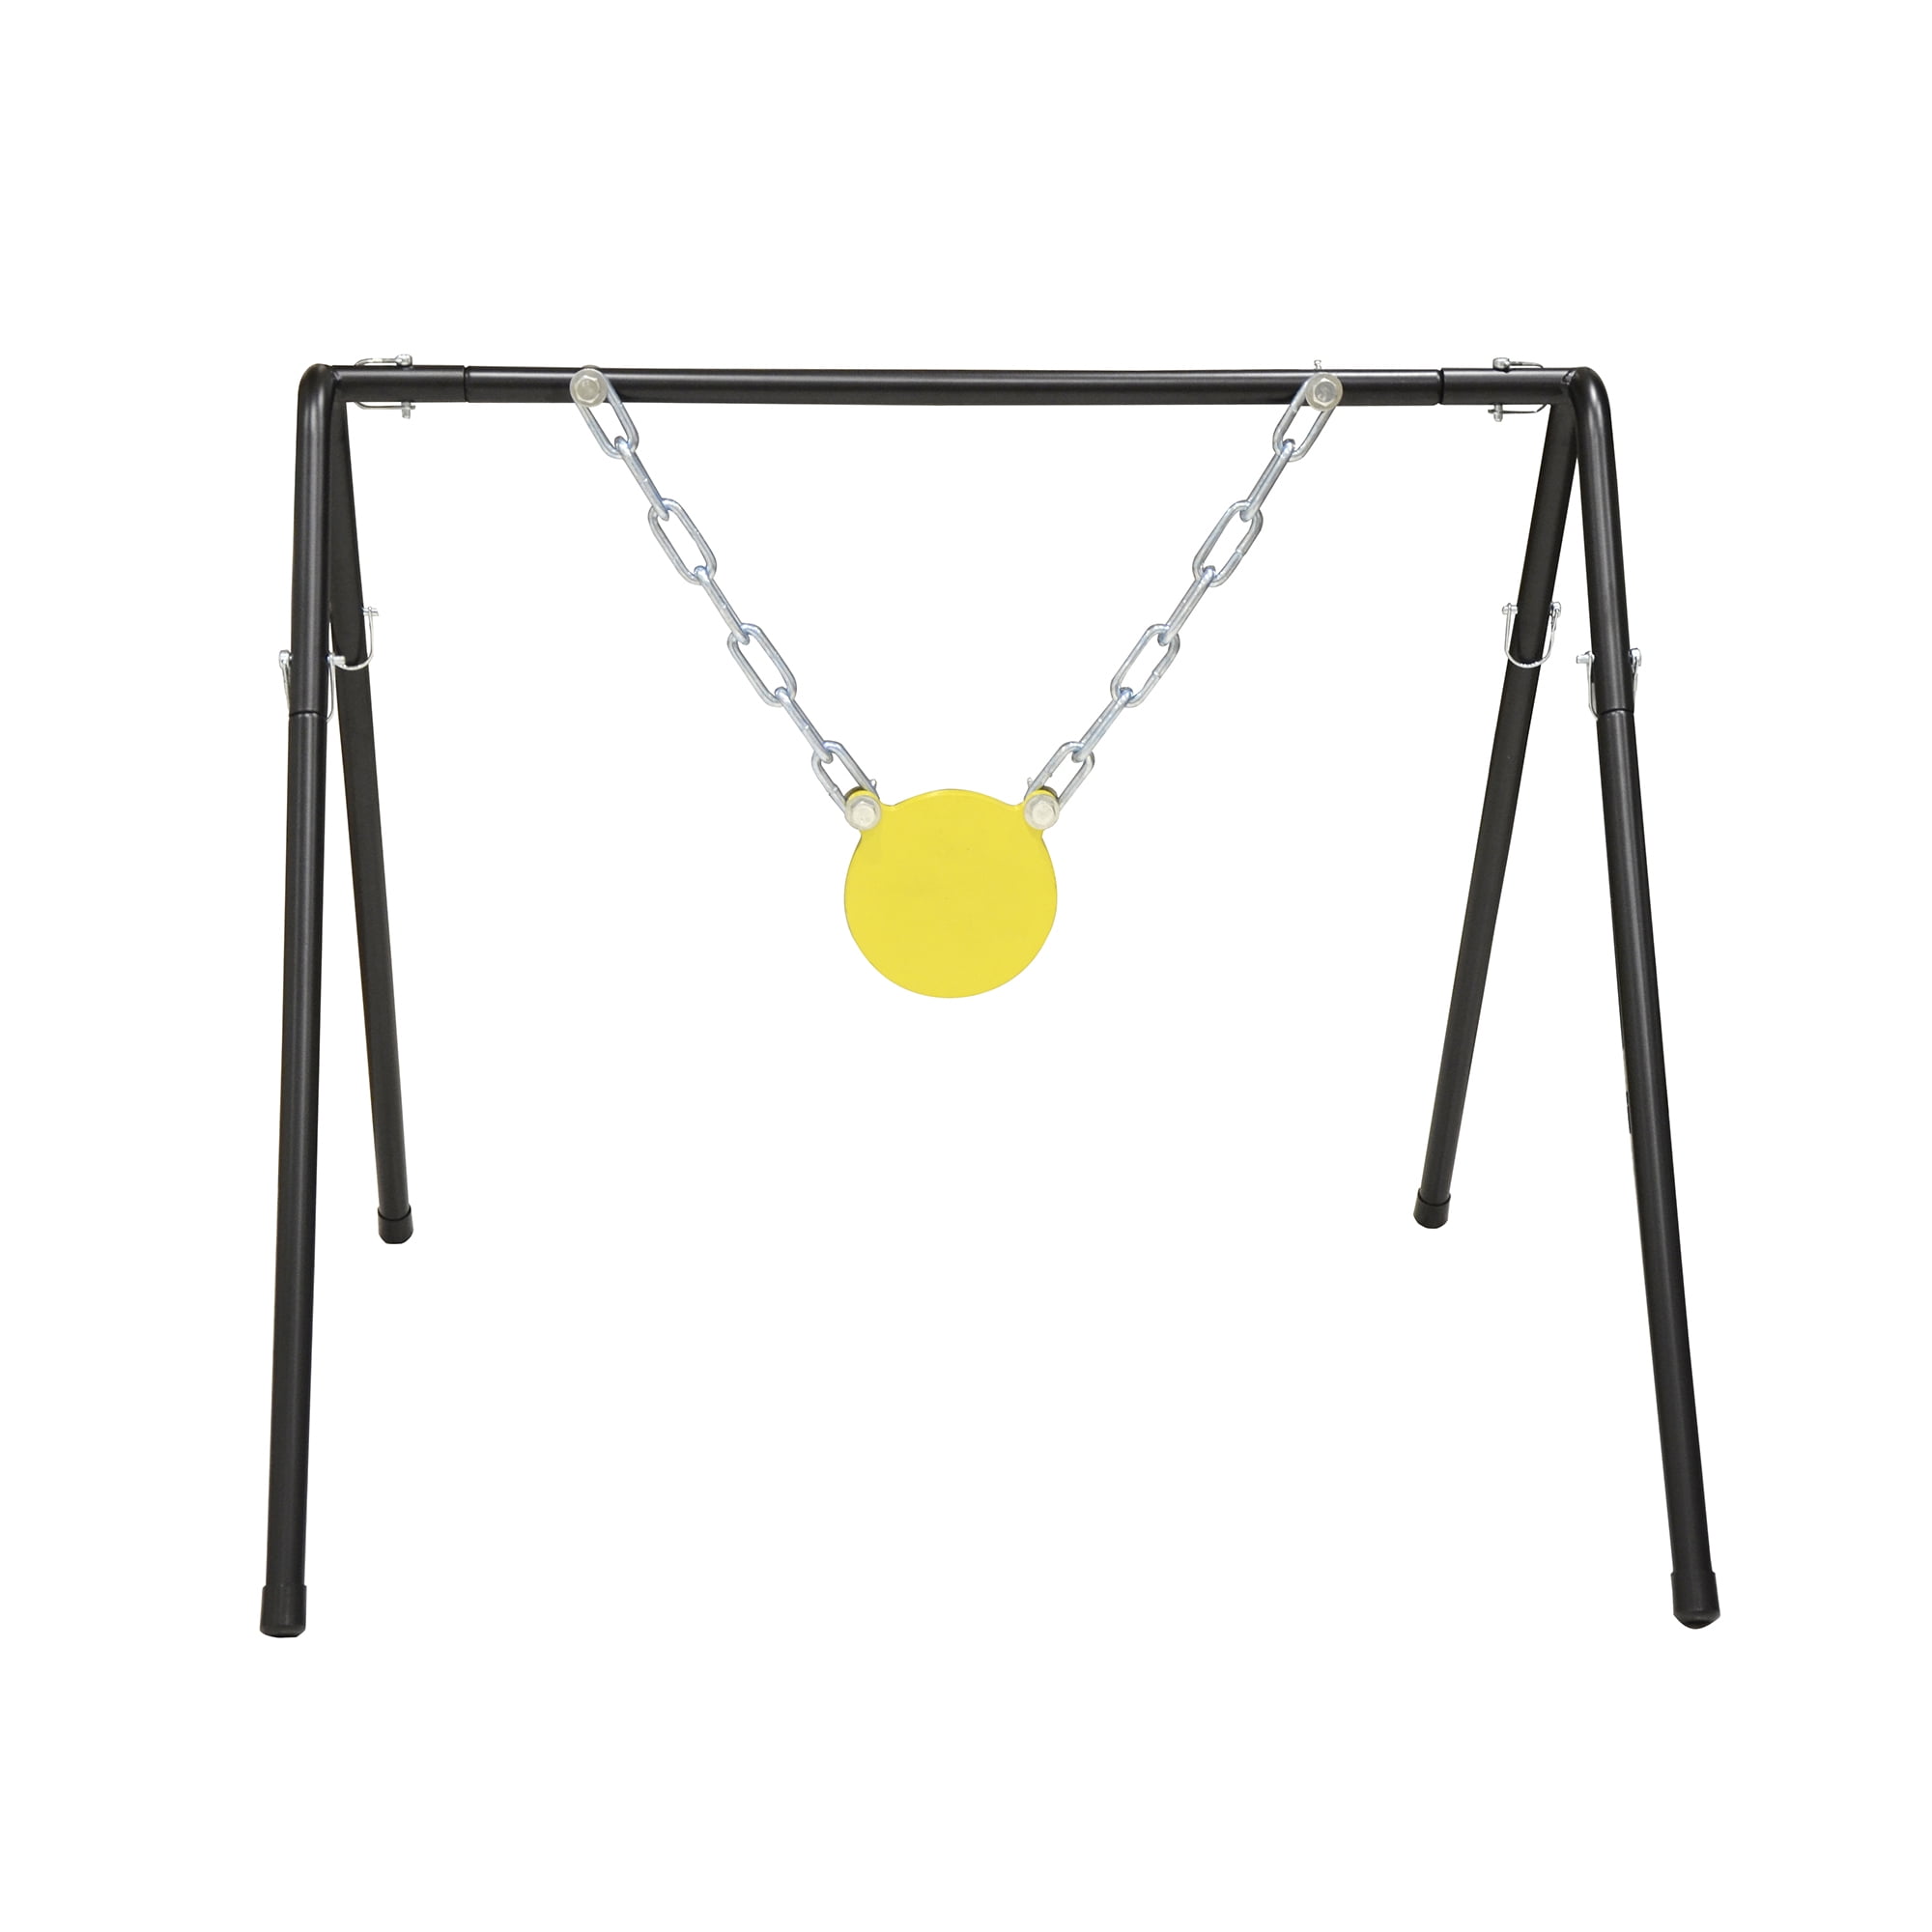 Steel Gong Target Stand and hanger includes 12" AR500 Steel Round Target 